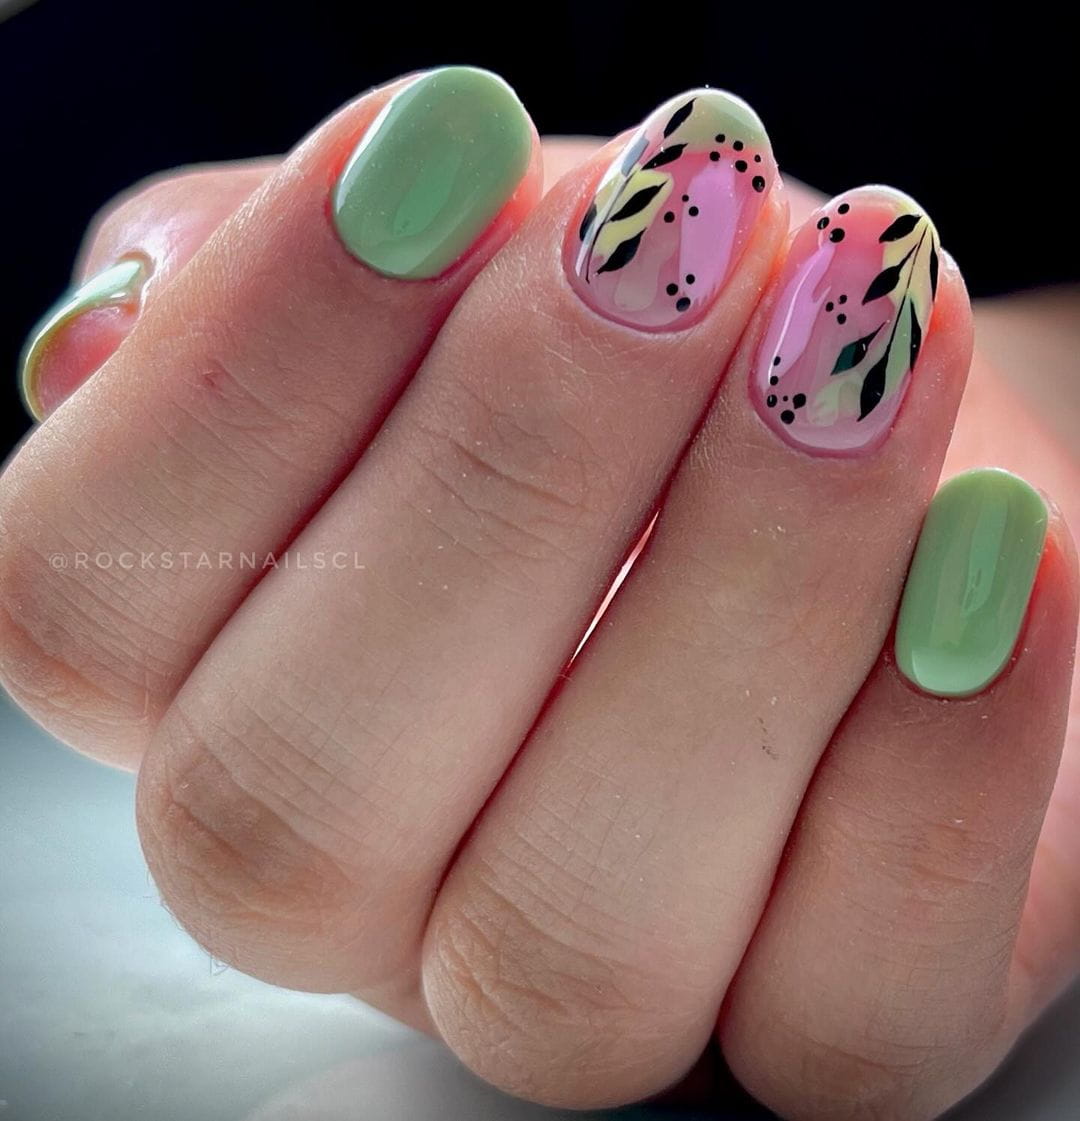 100+ Short Nail Designs You’ll Want To Try This Year images 8